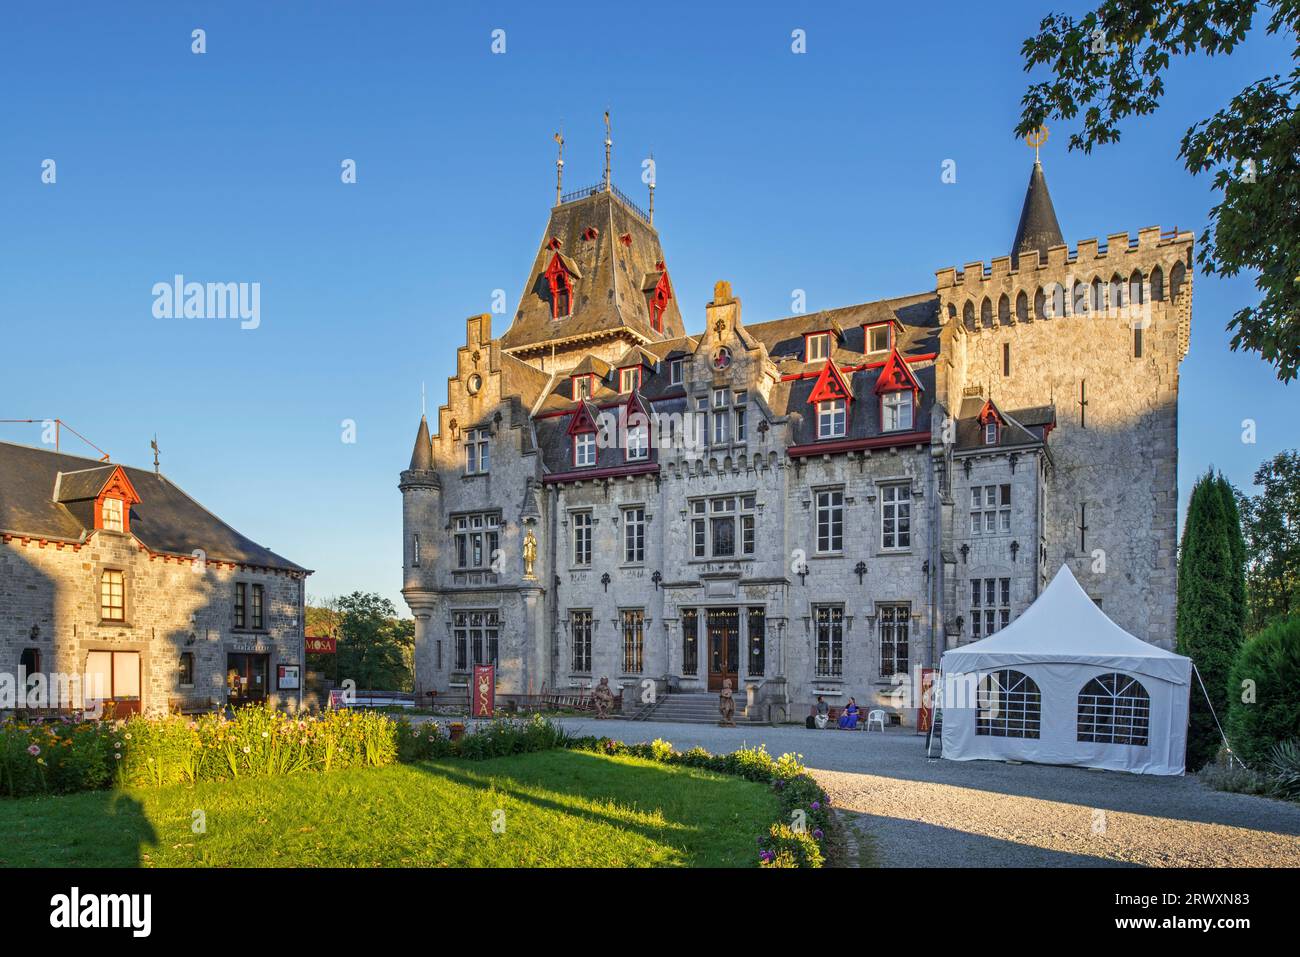 Radhadesh / Château de Petite-Somme, neo-Gothic castle owned by the Hare Krishna movement ISKCON near Durbuy, Luxembourg, Wallonia, Belgium Stock Photo